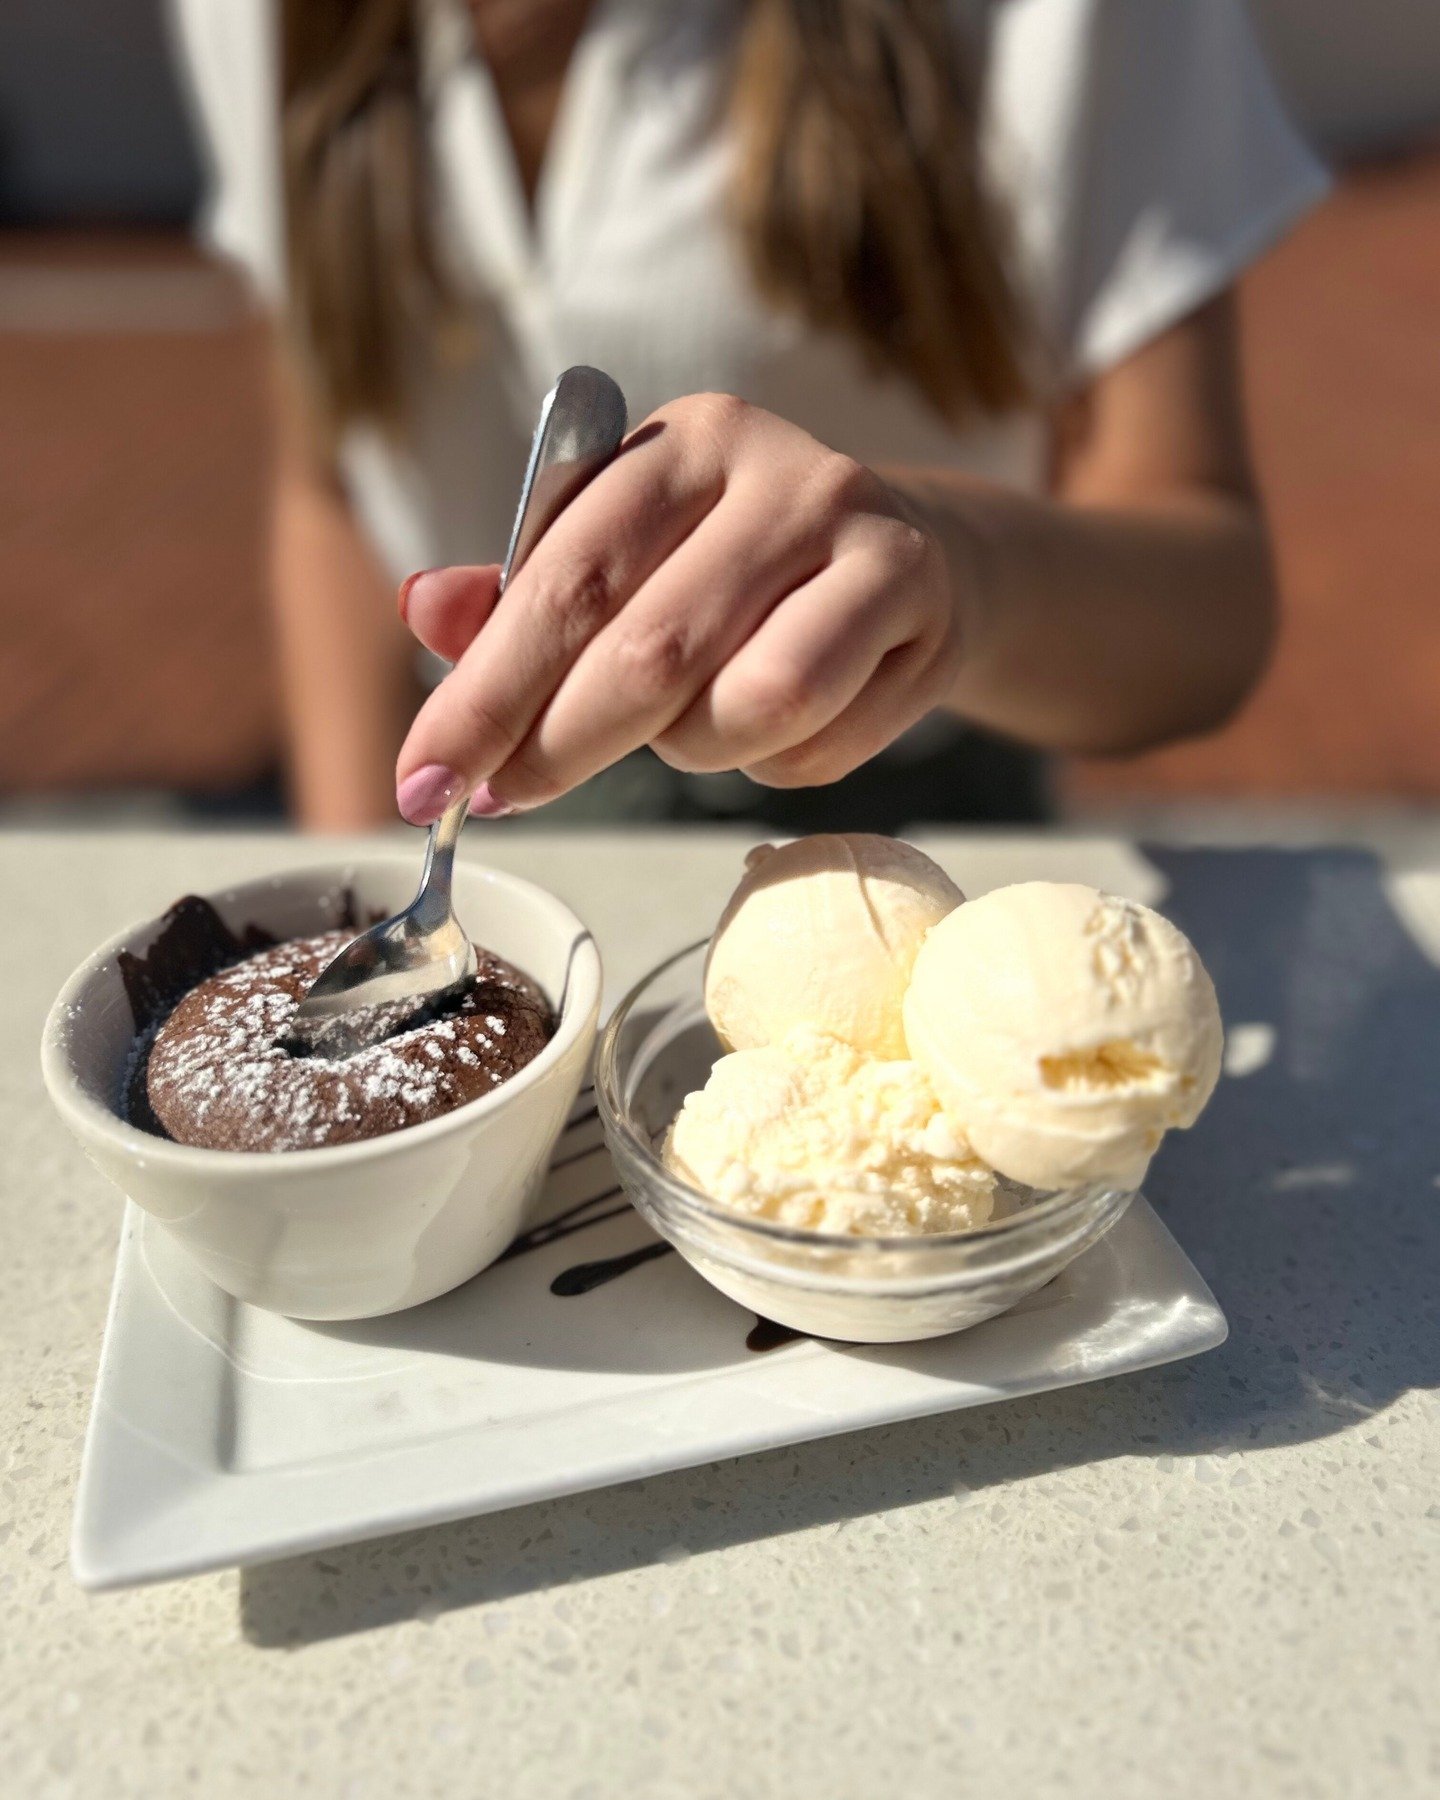 Have you had our Hot Chocolate Molten Cake? It's a MUST. 🍫